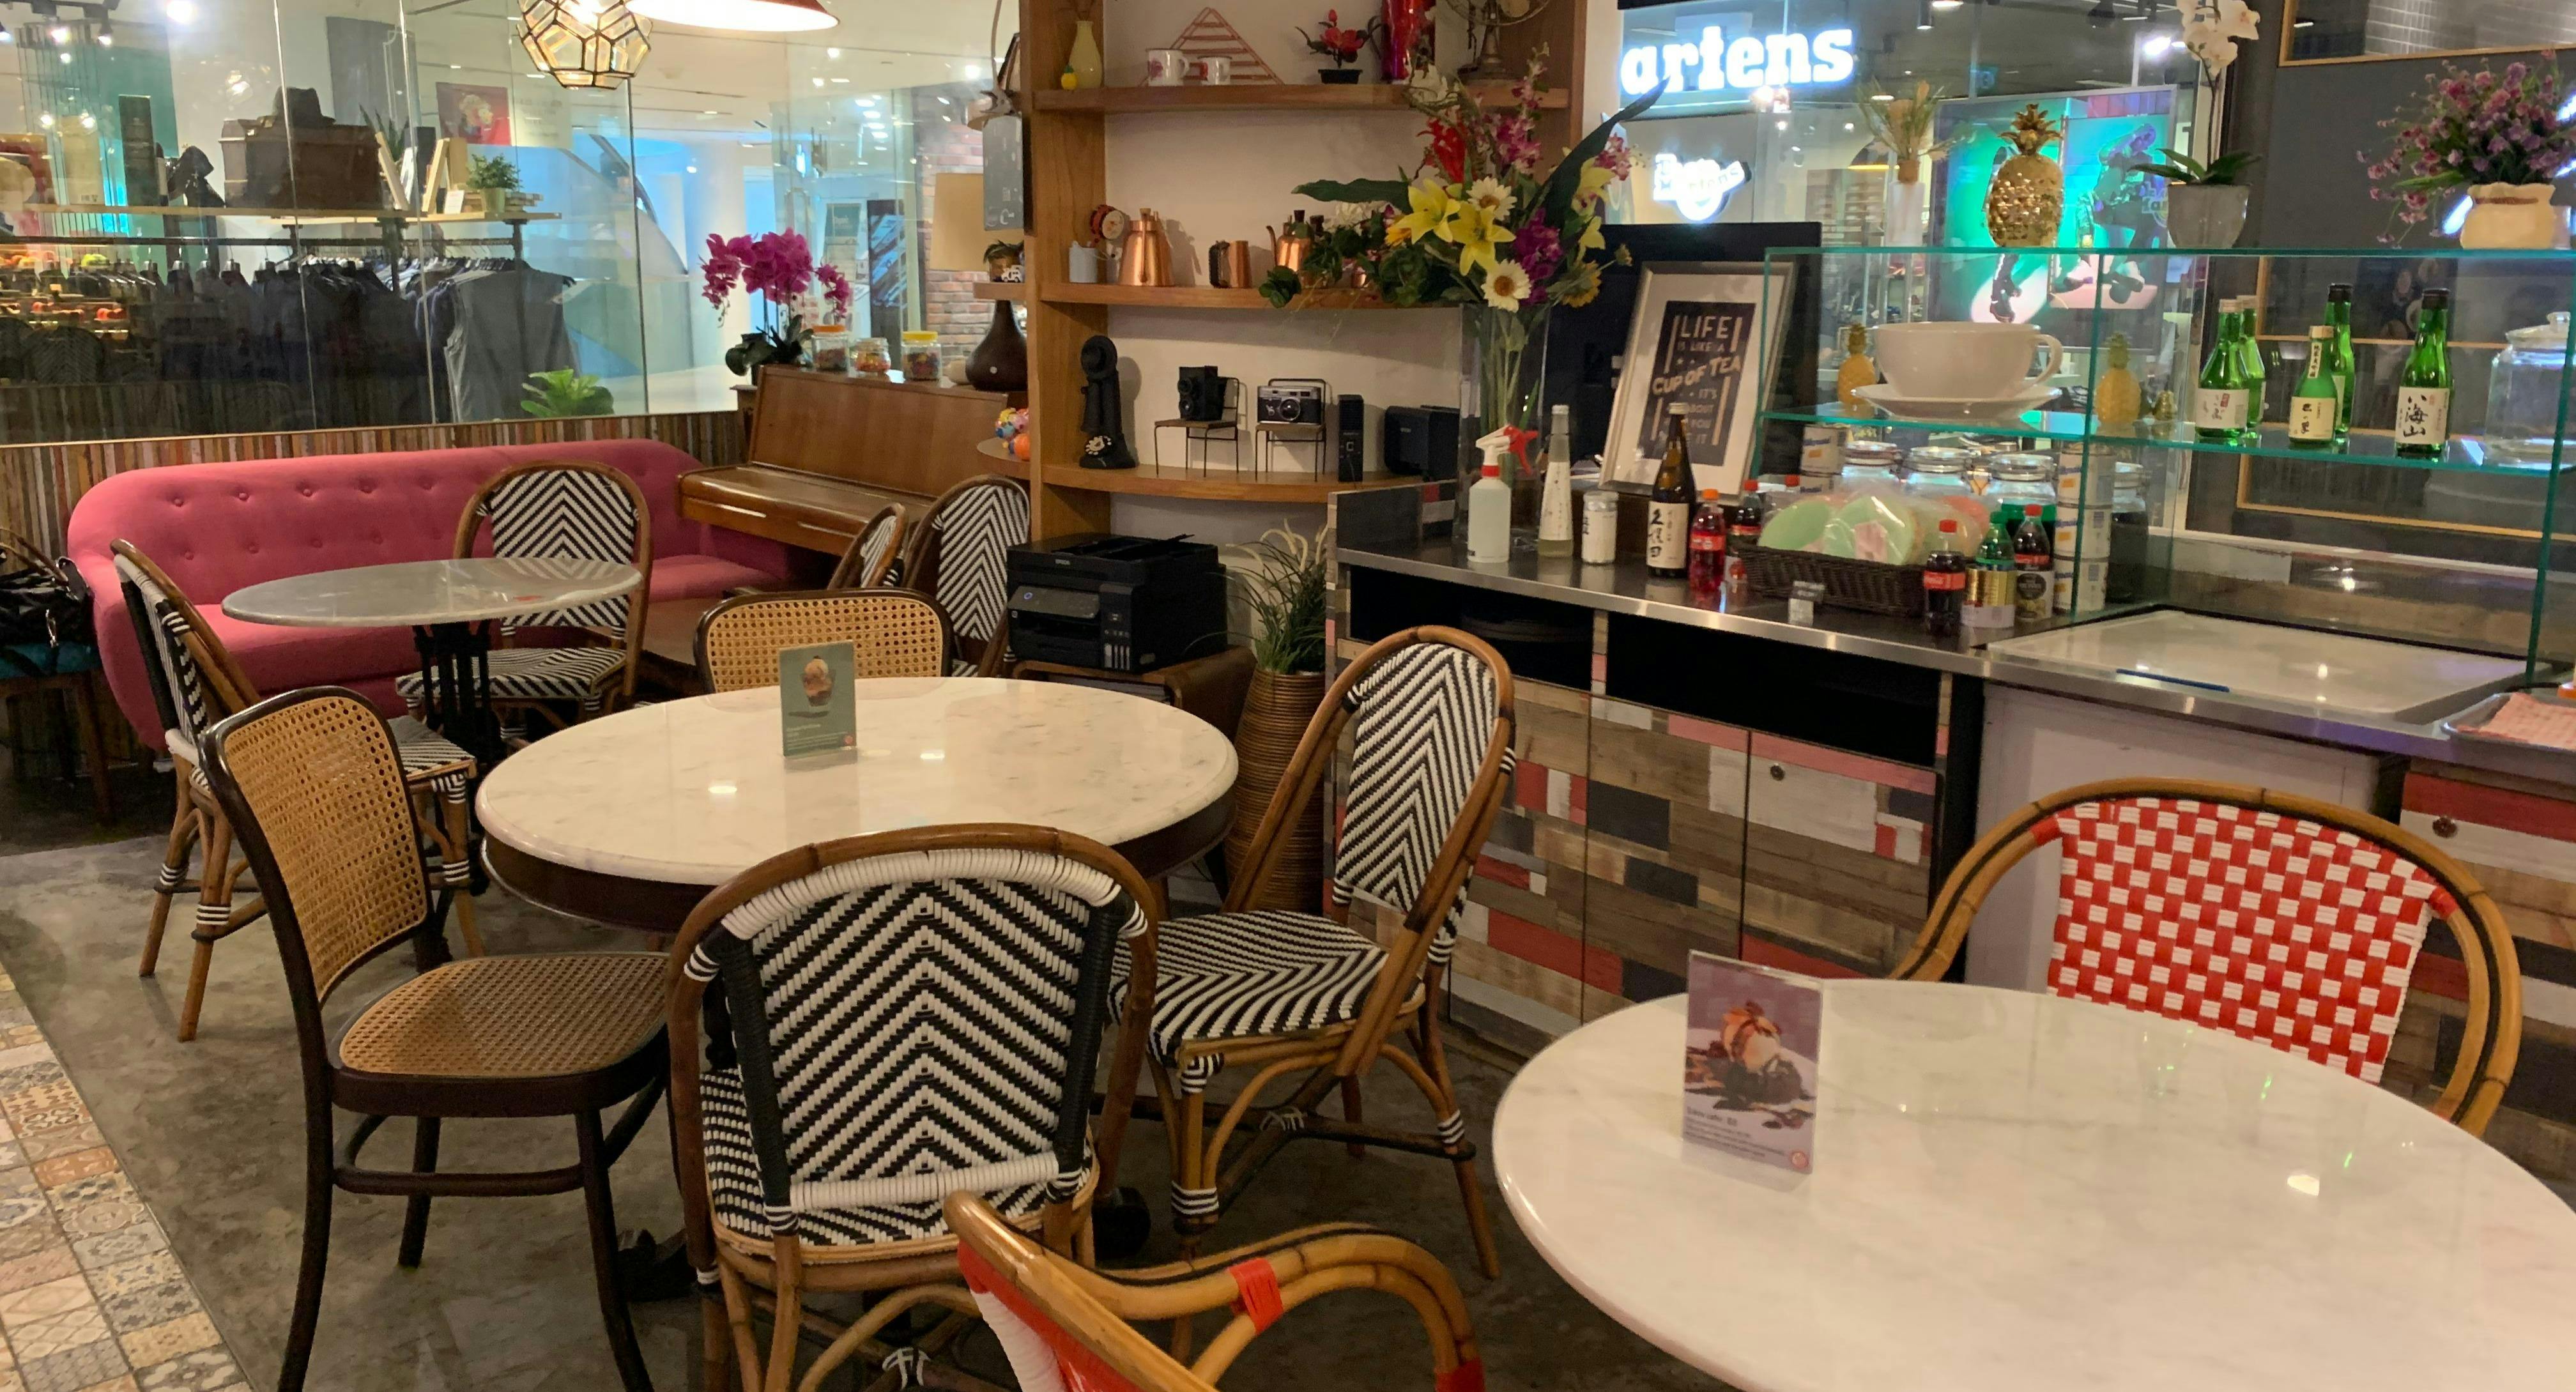 Photo of restaurant Vibes Cafe - Wheelock in Orchard, Singapore